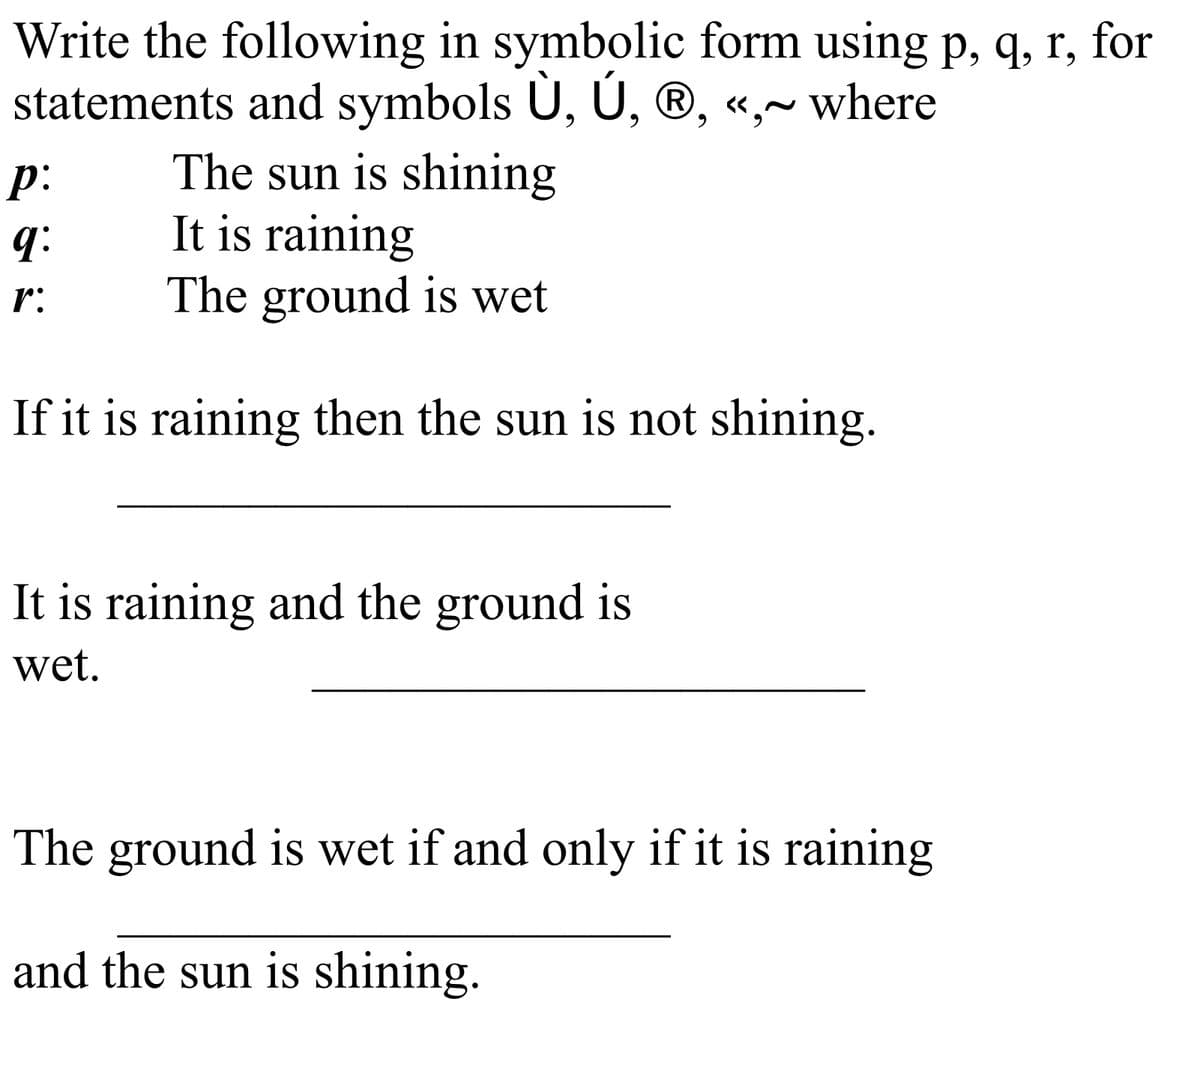 Write the following in symbolic form using p, q, r, for
statements and symbols U, U, ®, «,~ where
The sun is shining
It is raining
The ground is wet
p:
q:
r:
If it is raining then the sun is not shining.
It is raining and the ground is
wet.
The ground is wet if and only if it is raining
and the sun is shining.
